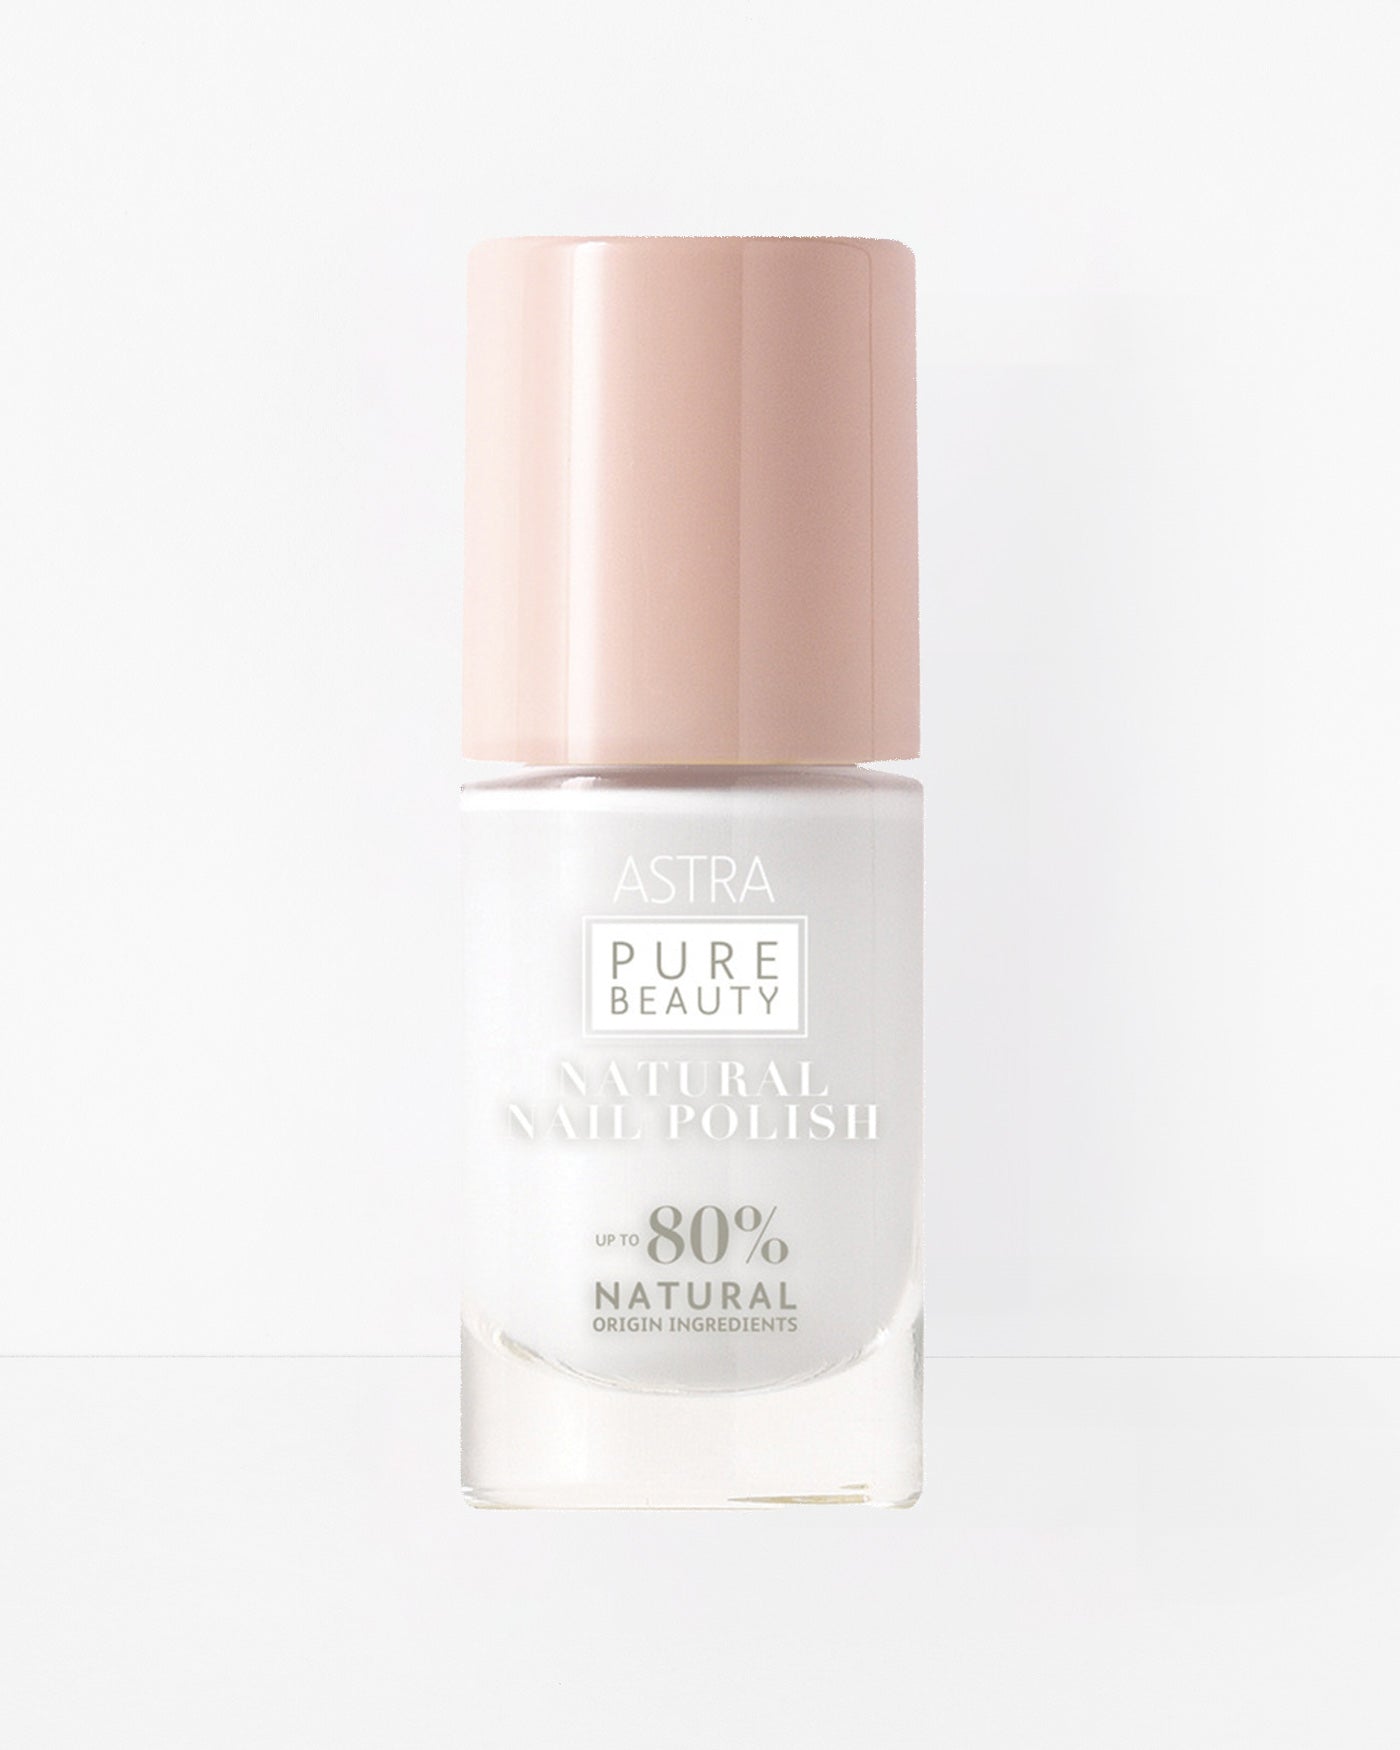 PURE BEAUTY NAIL POLISH - Smalto Unghie Naturale - All Products - Astra Make-Up